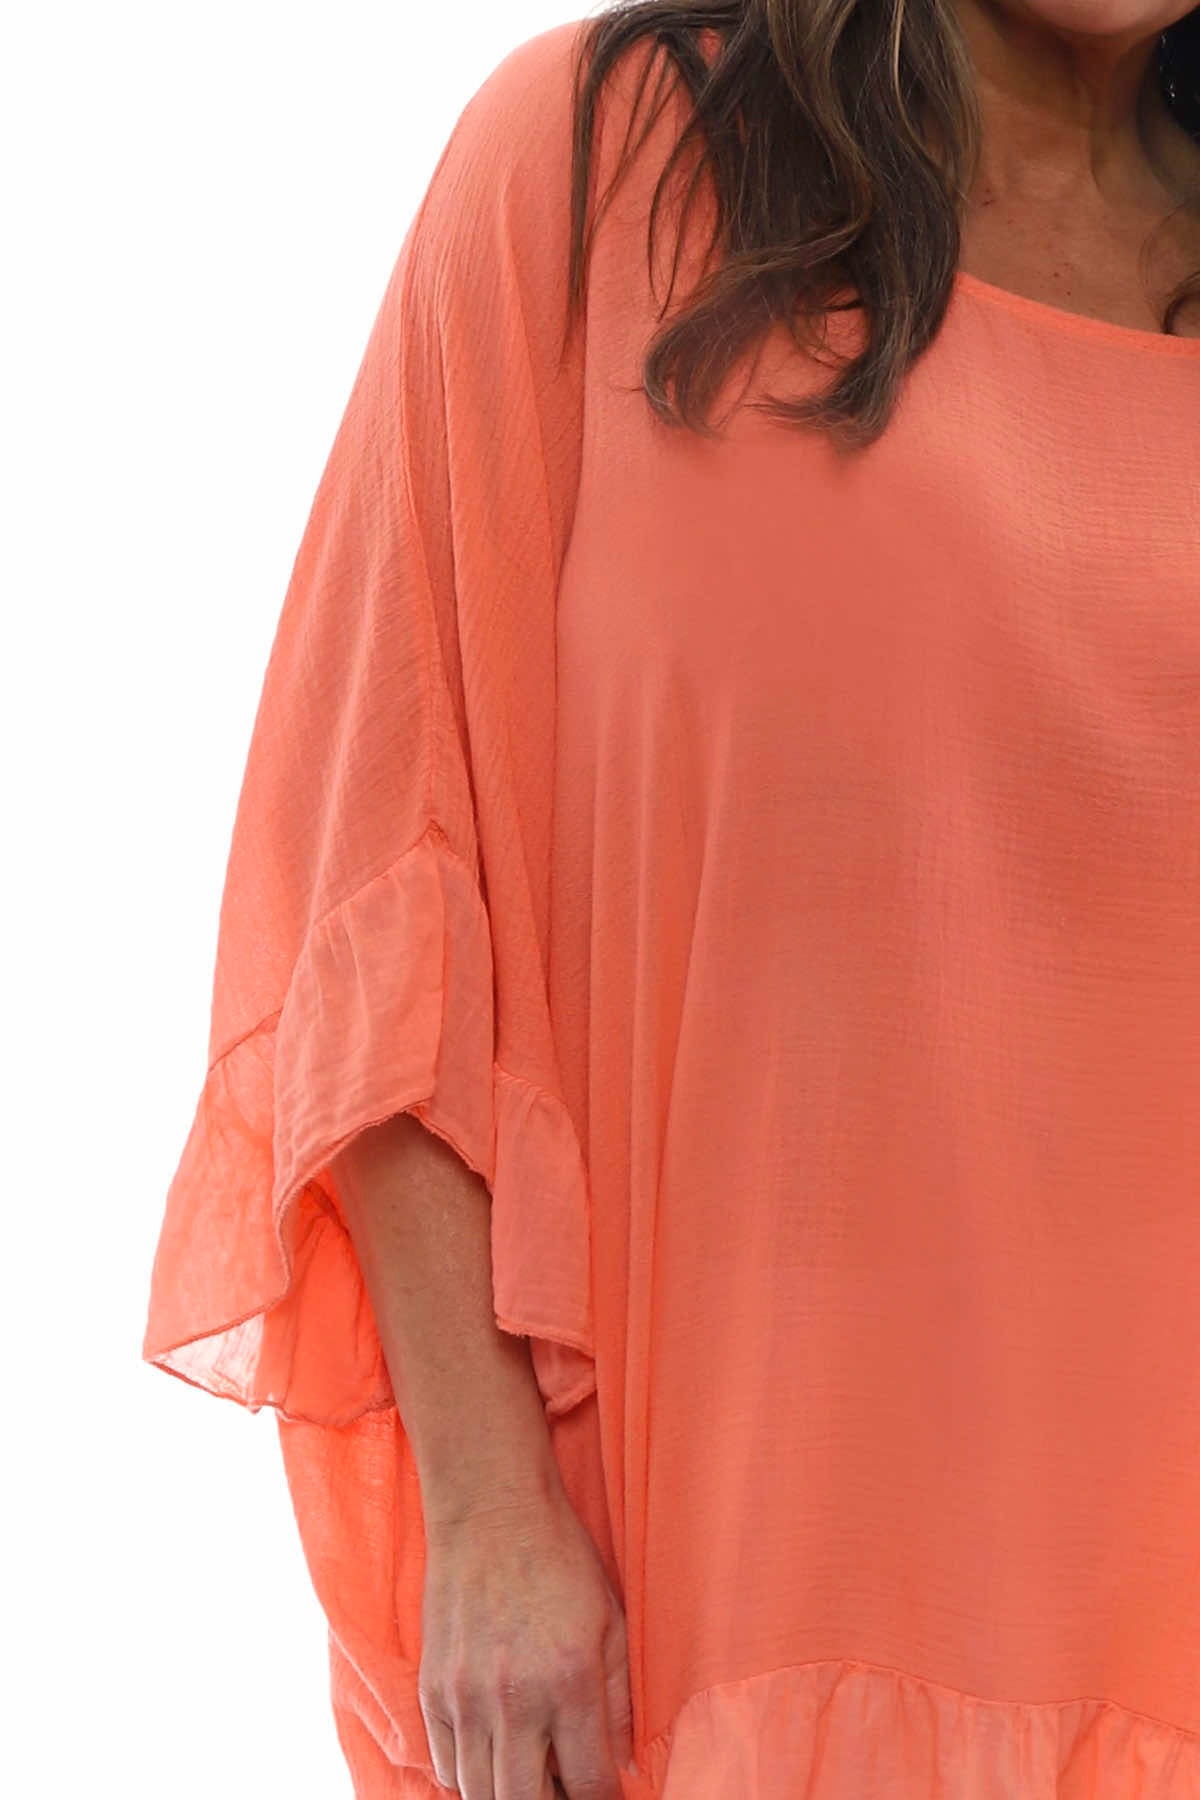 Cheyenne Frill Crinkle Cotton Top Coral